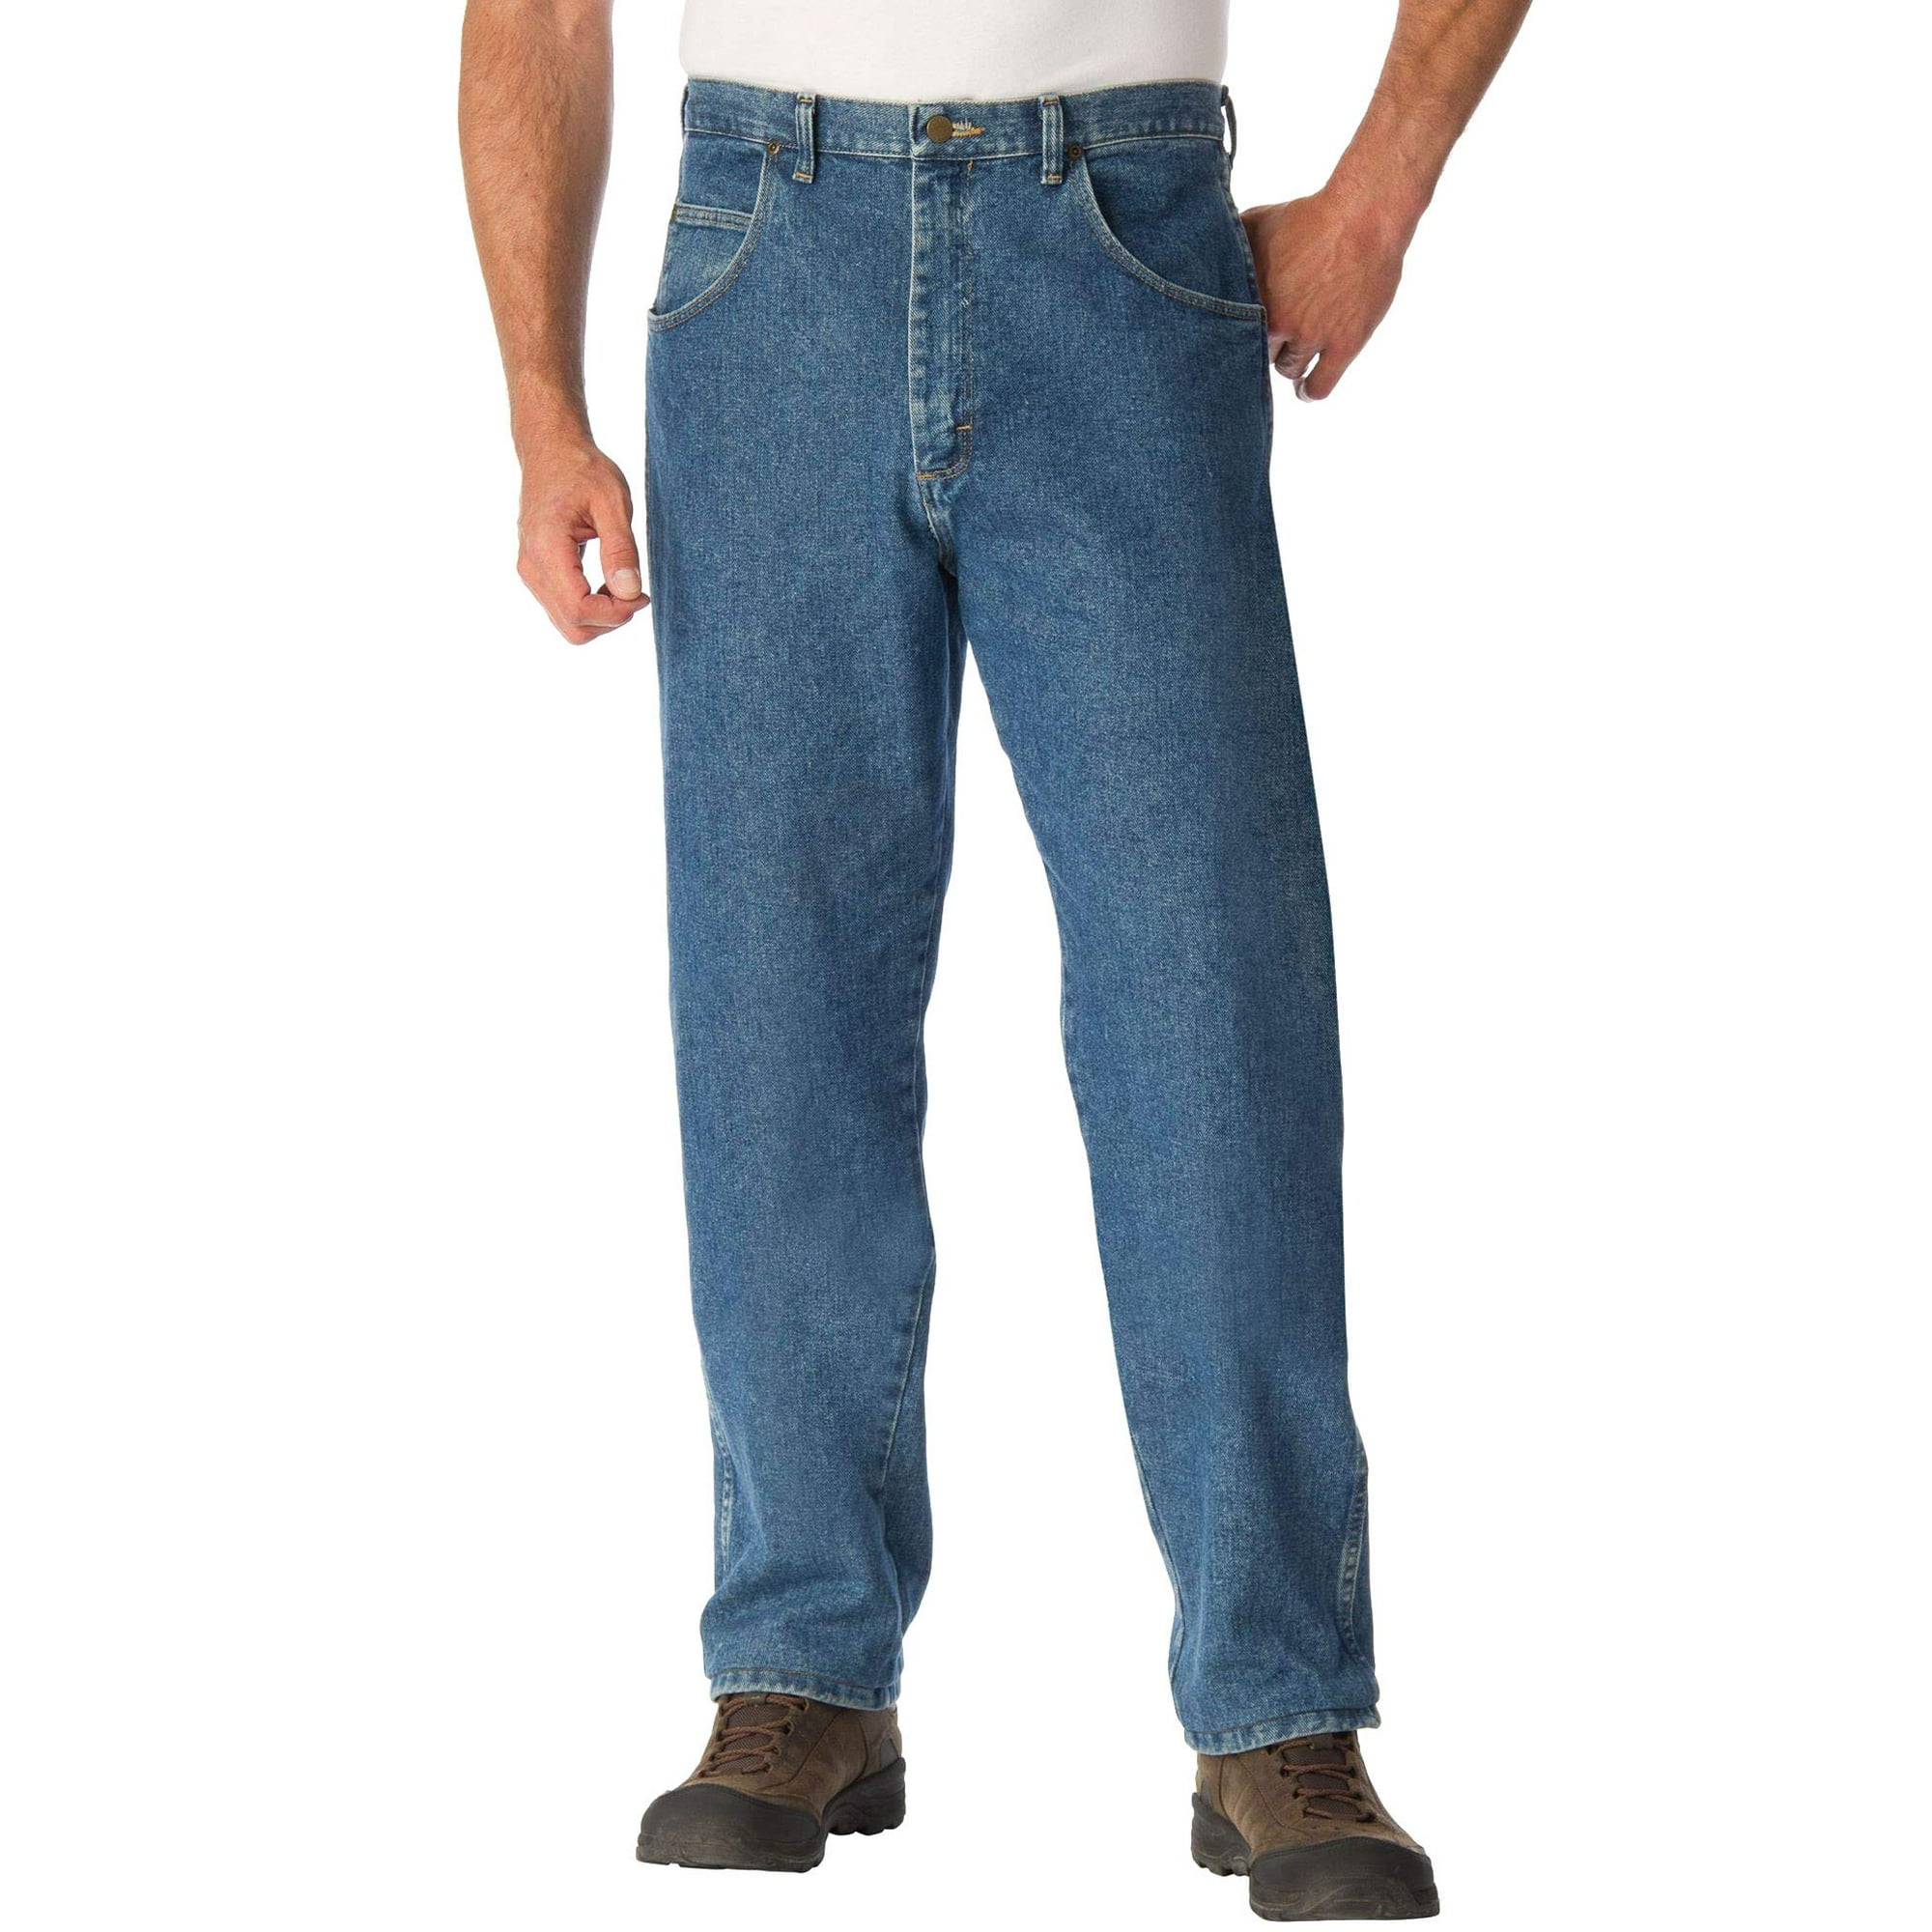 Wrangler Men's Big and Tall Rugged Wear Relaxed Fit Jeans | Walmart Canada